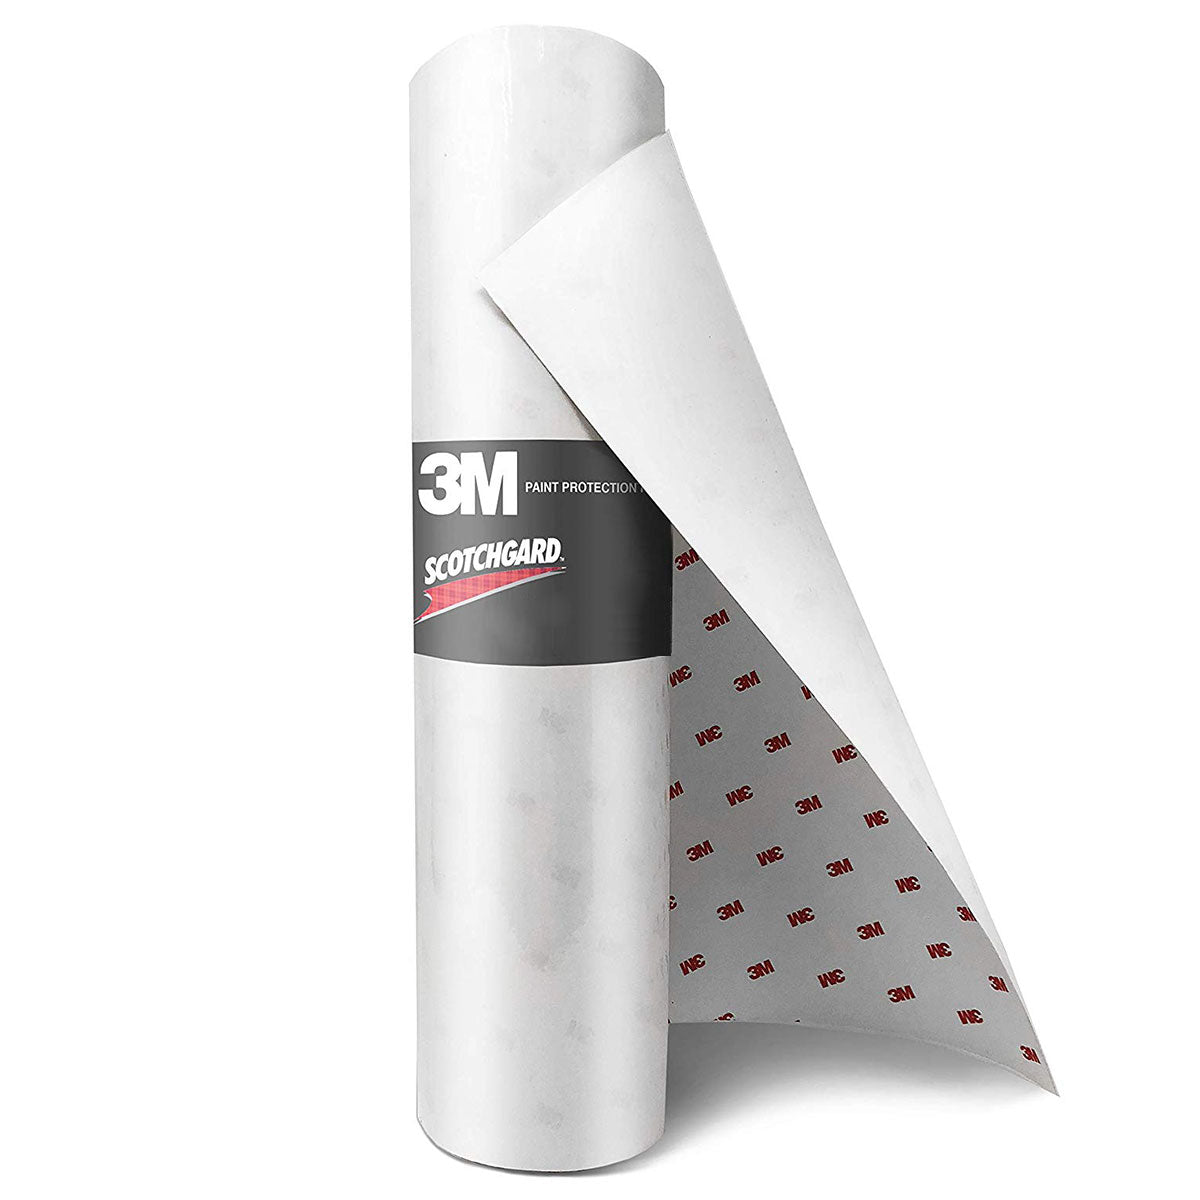 3M Paint Protection Film Roll 100mm wide per meter